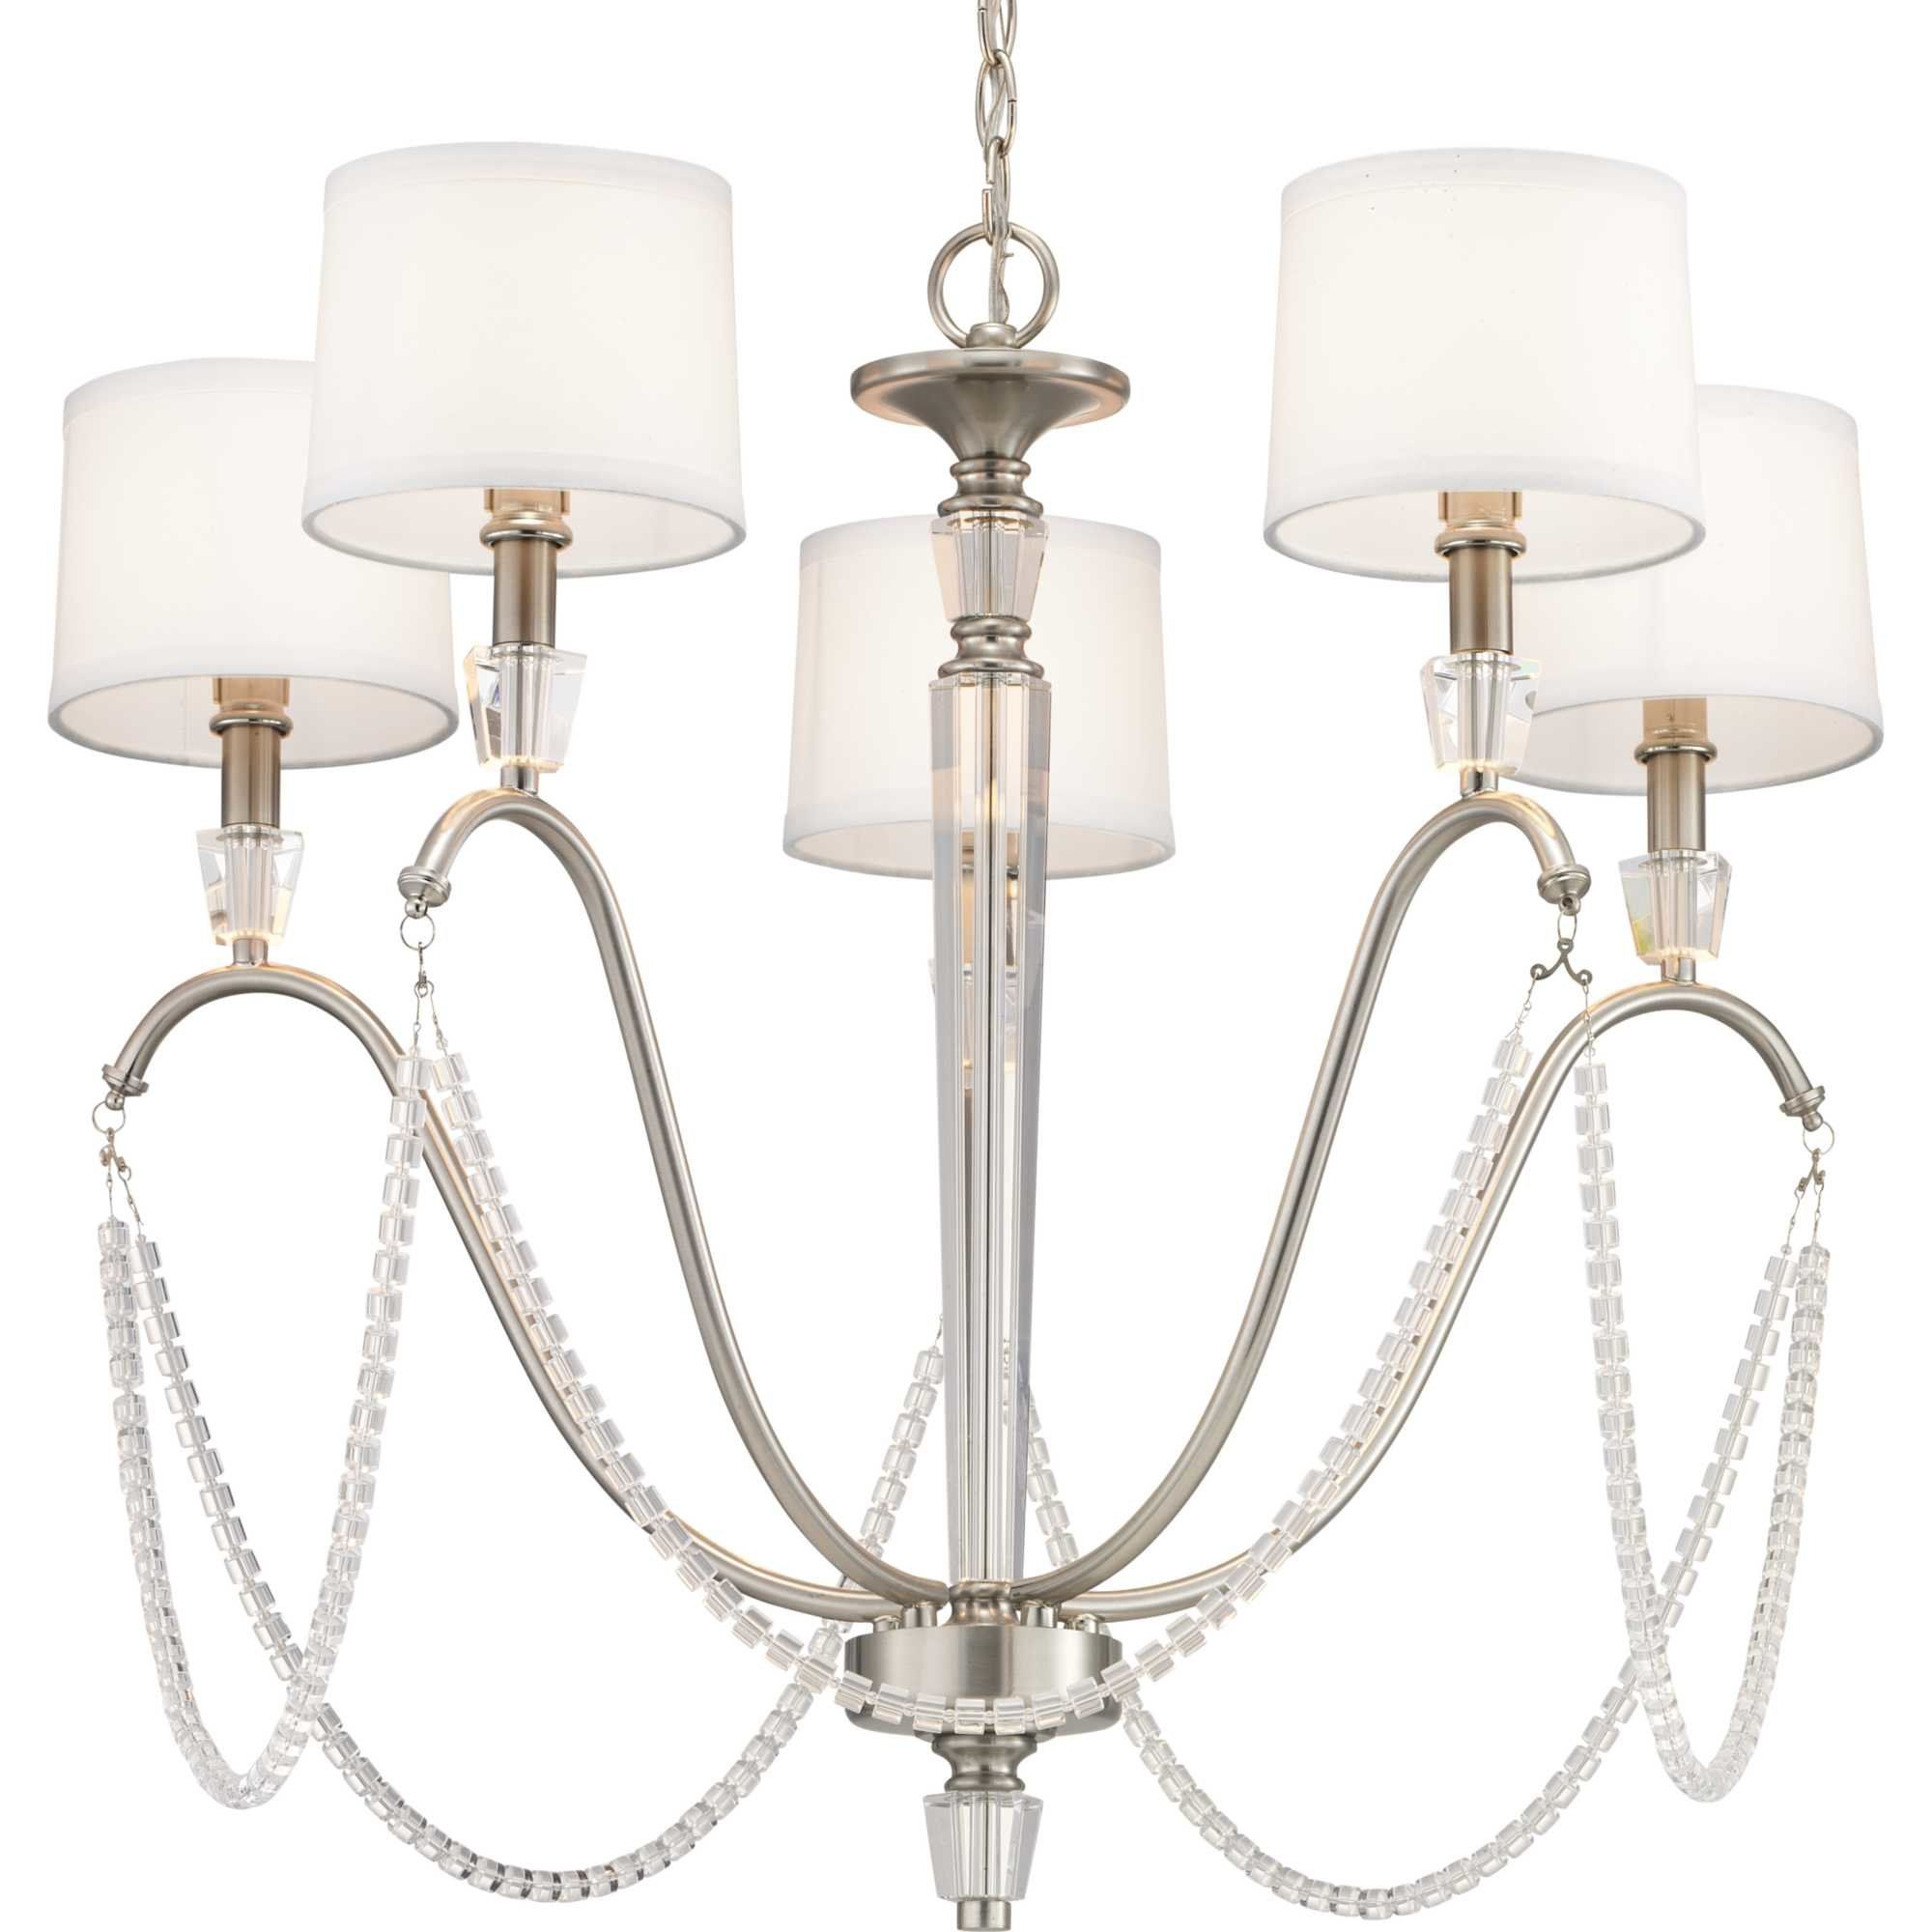 Lappin 5 Light Candle Style Chandelier In Florentina 5 Light Candle Style Chandeliers (View 13 of 30)